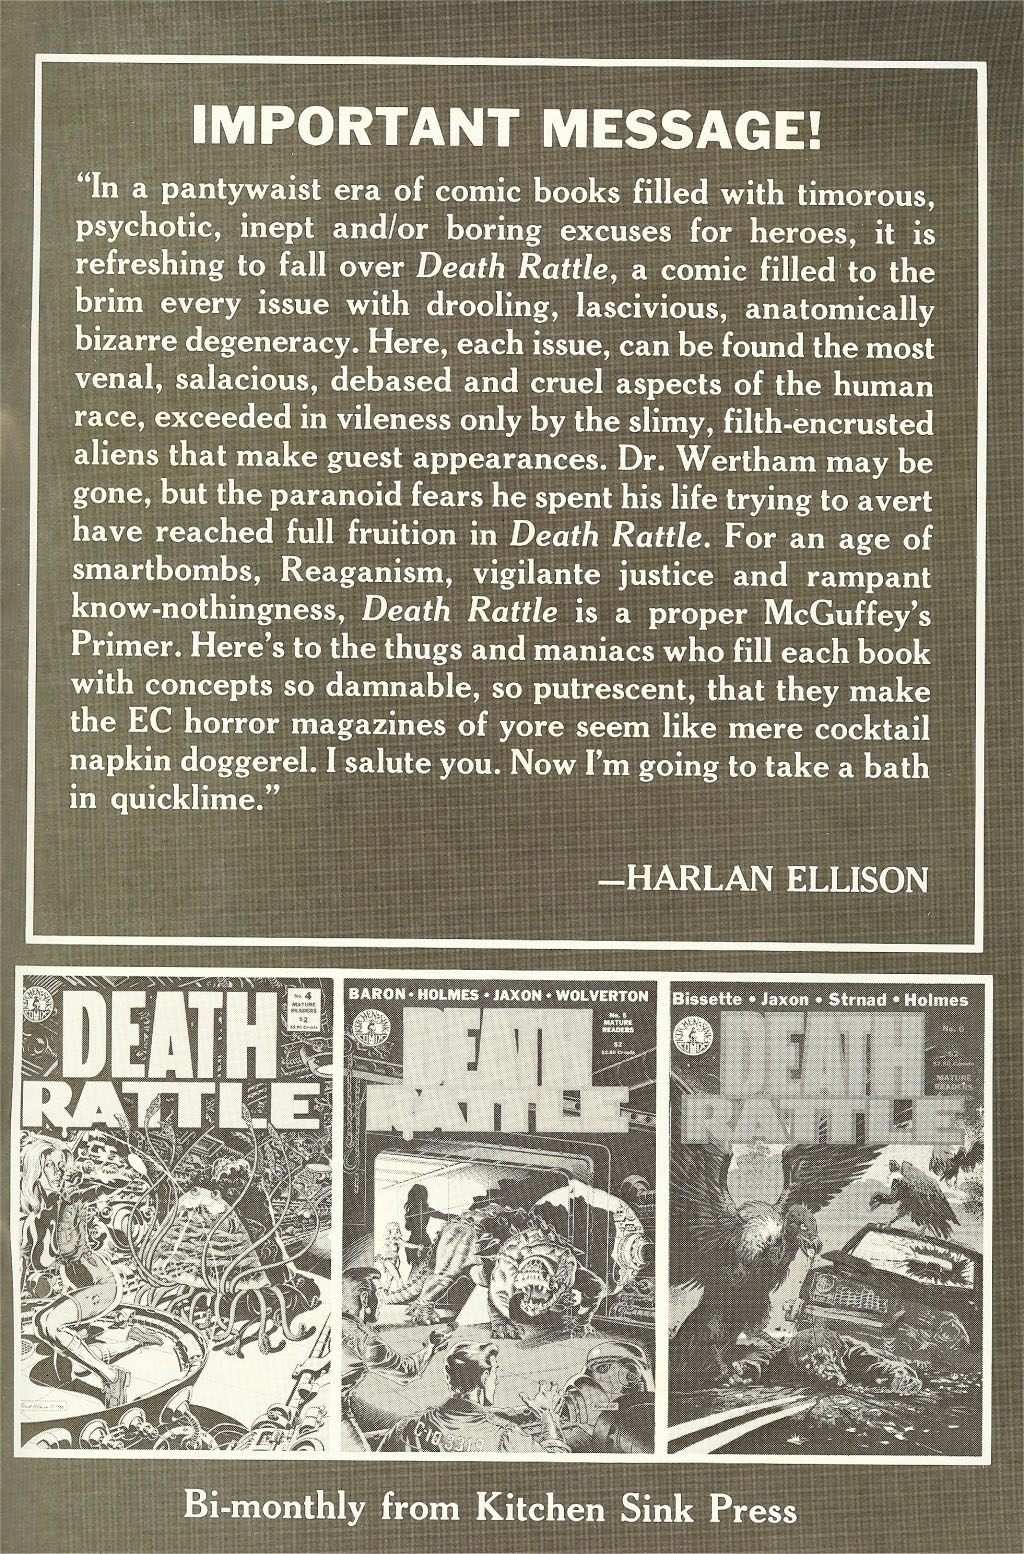 Death Rattle #7, text by Harlan Ellison